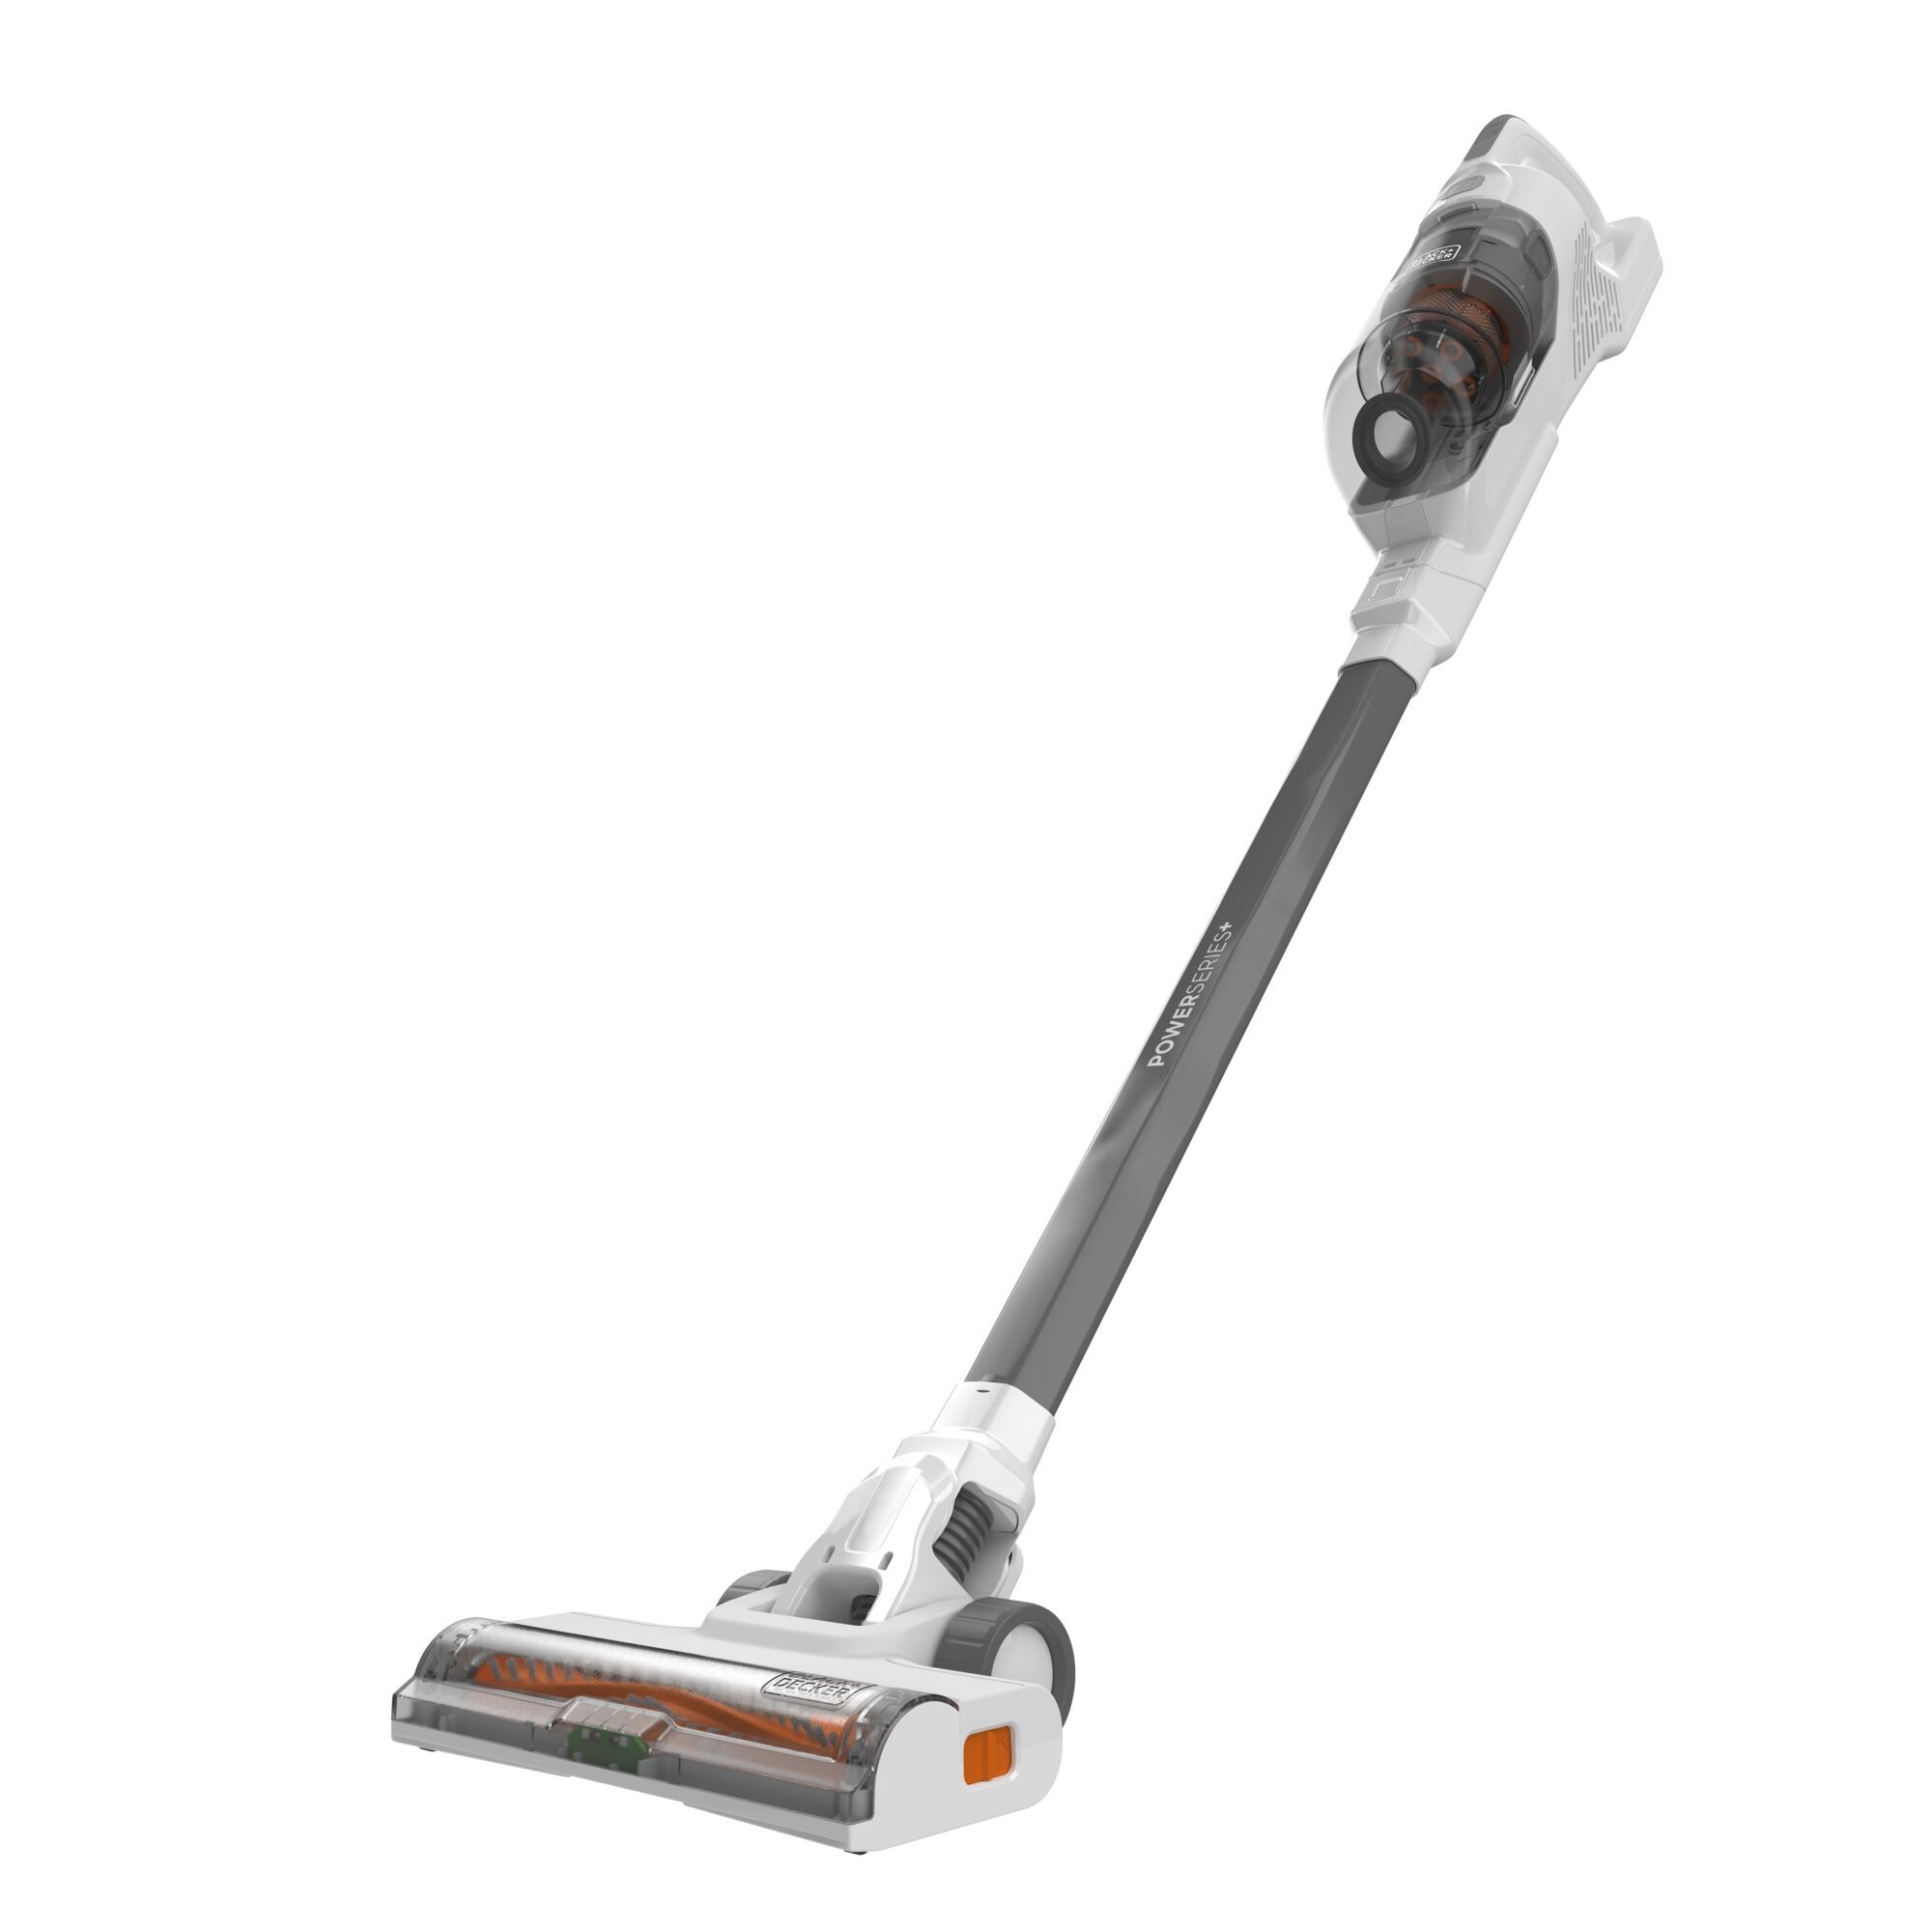 BLACK+DECKER - 18V 2-in-1 Stick Vacuum with Integral 1.5Ah Battery